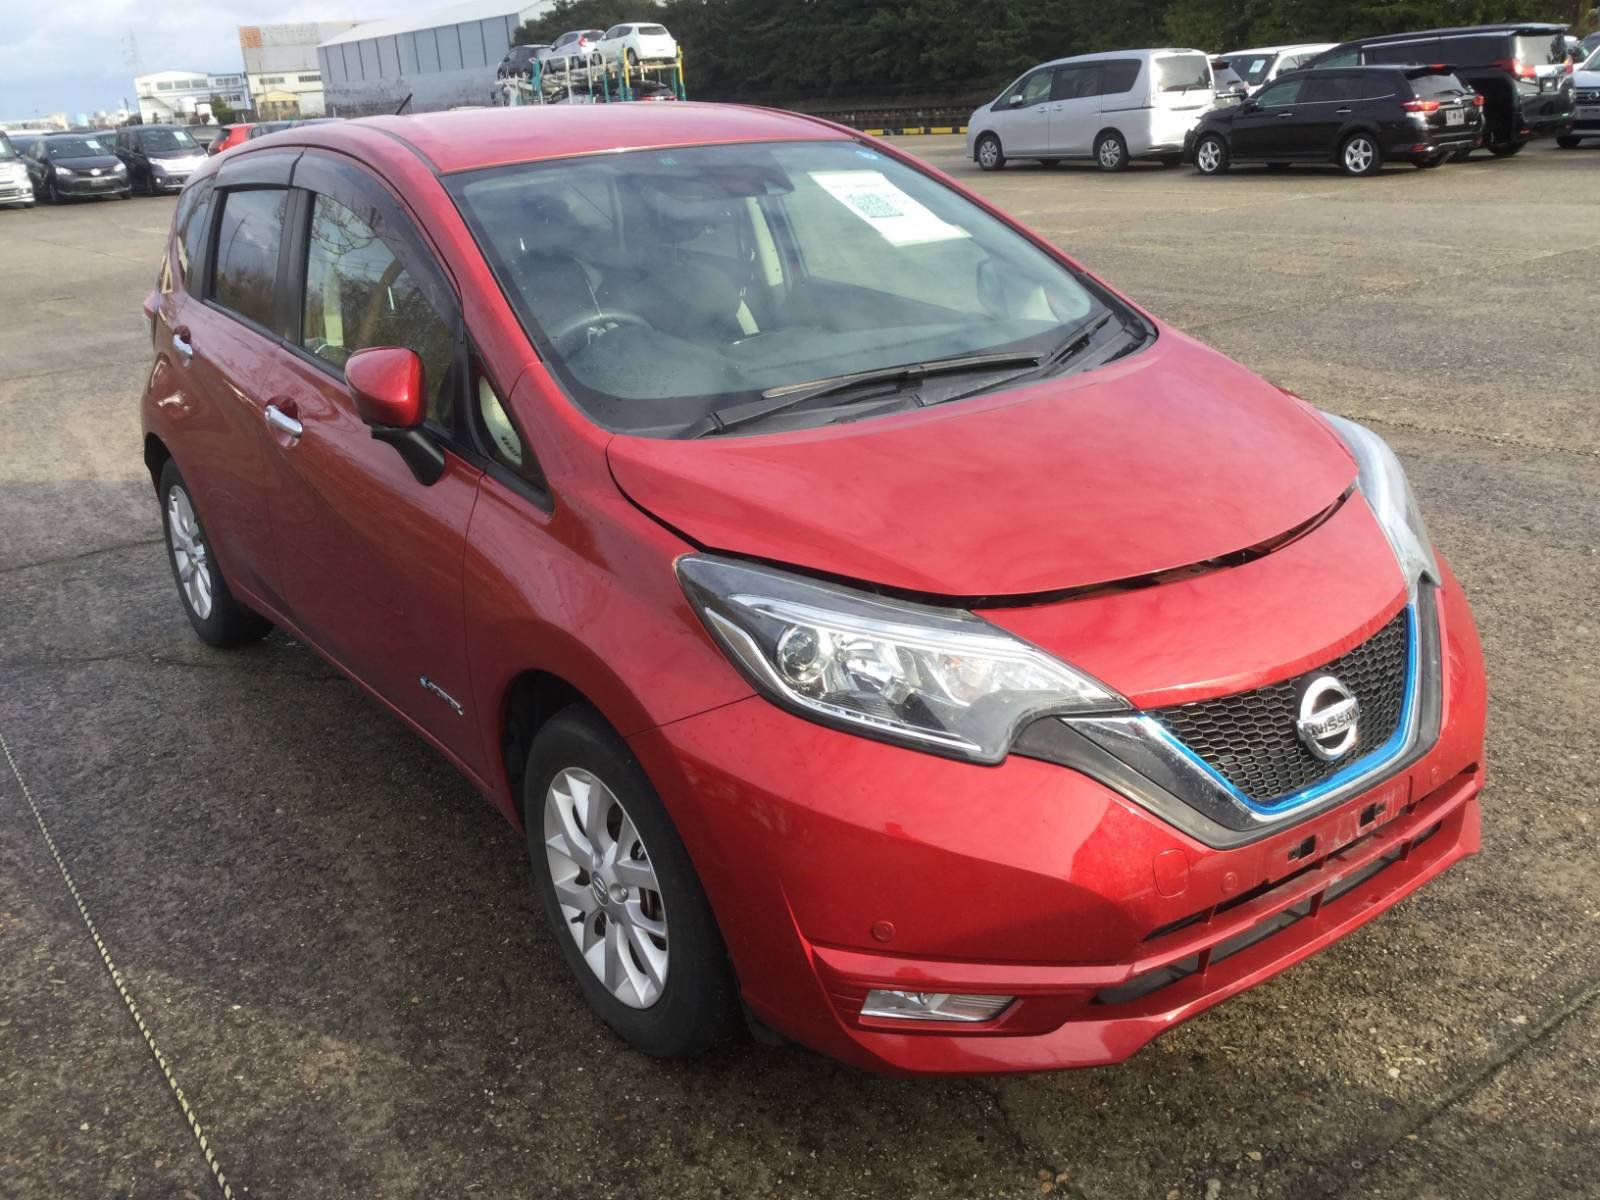 Note e 12. Nissan Note 2017 гибрид. Ниссан ноут е12. Ниссан ноут e12 гибрид. Nissan Note e-Power 2017.